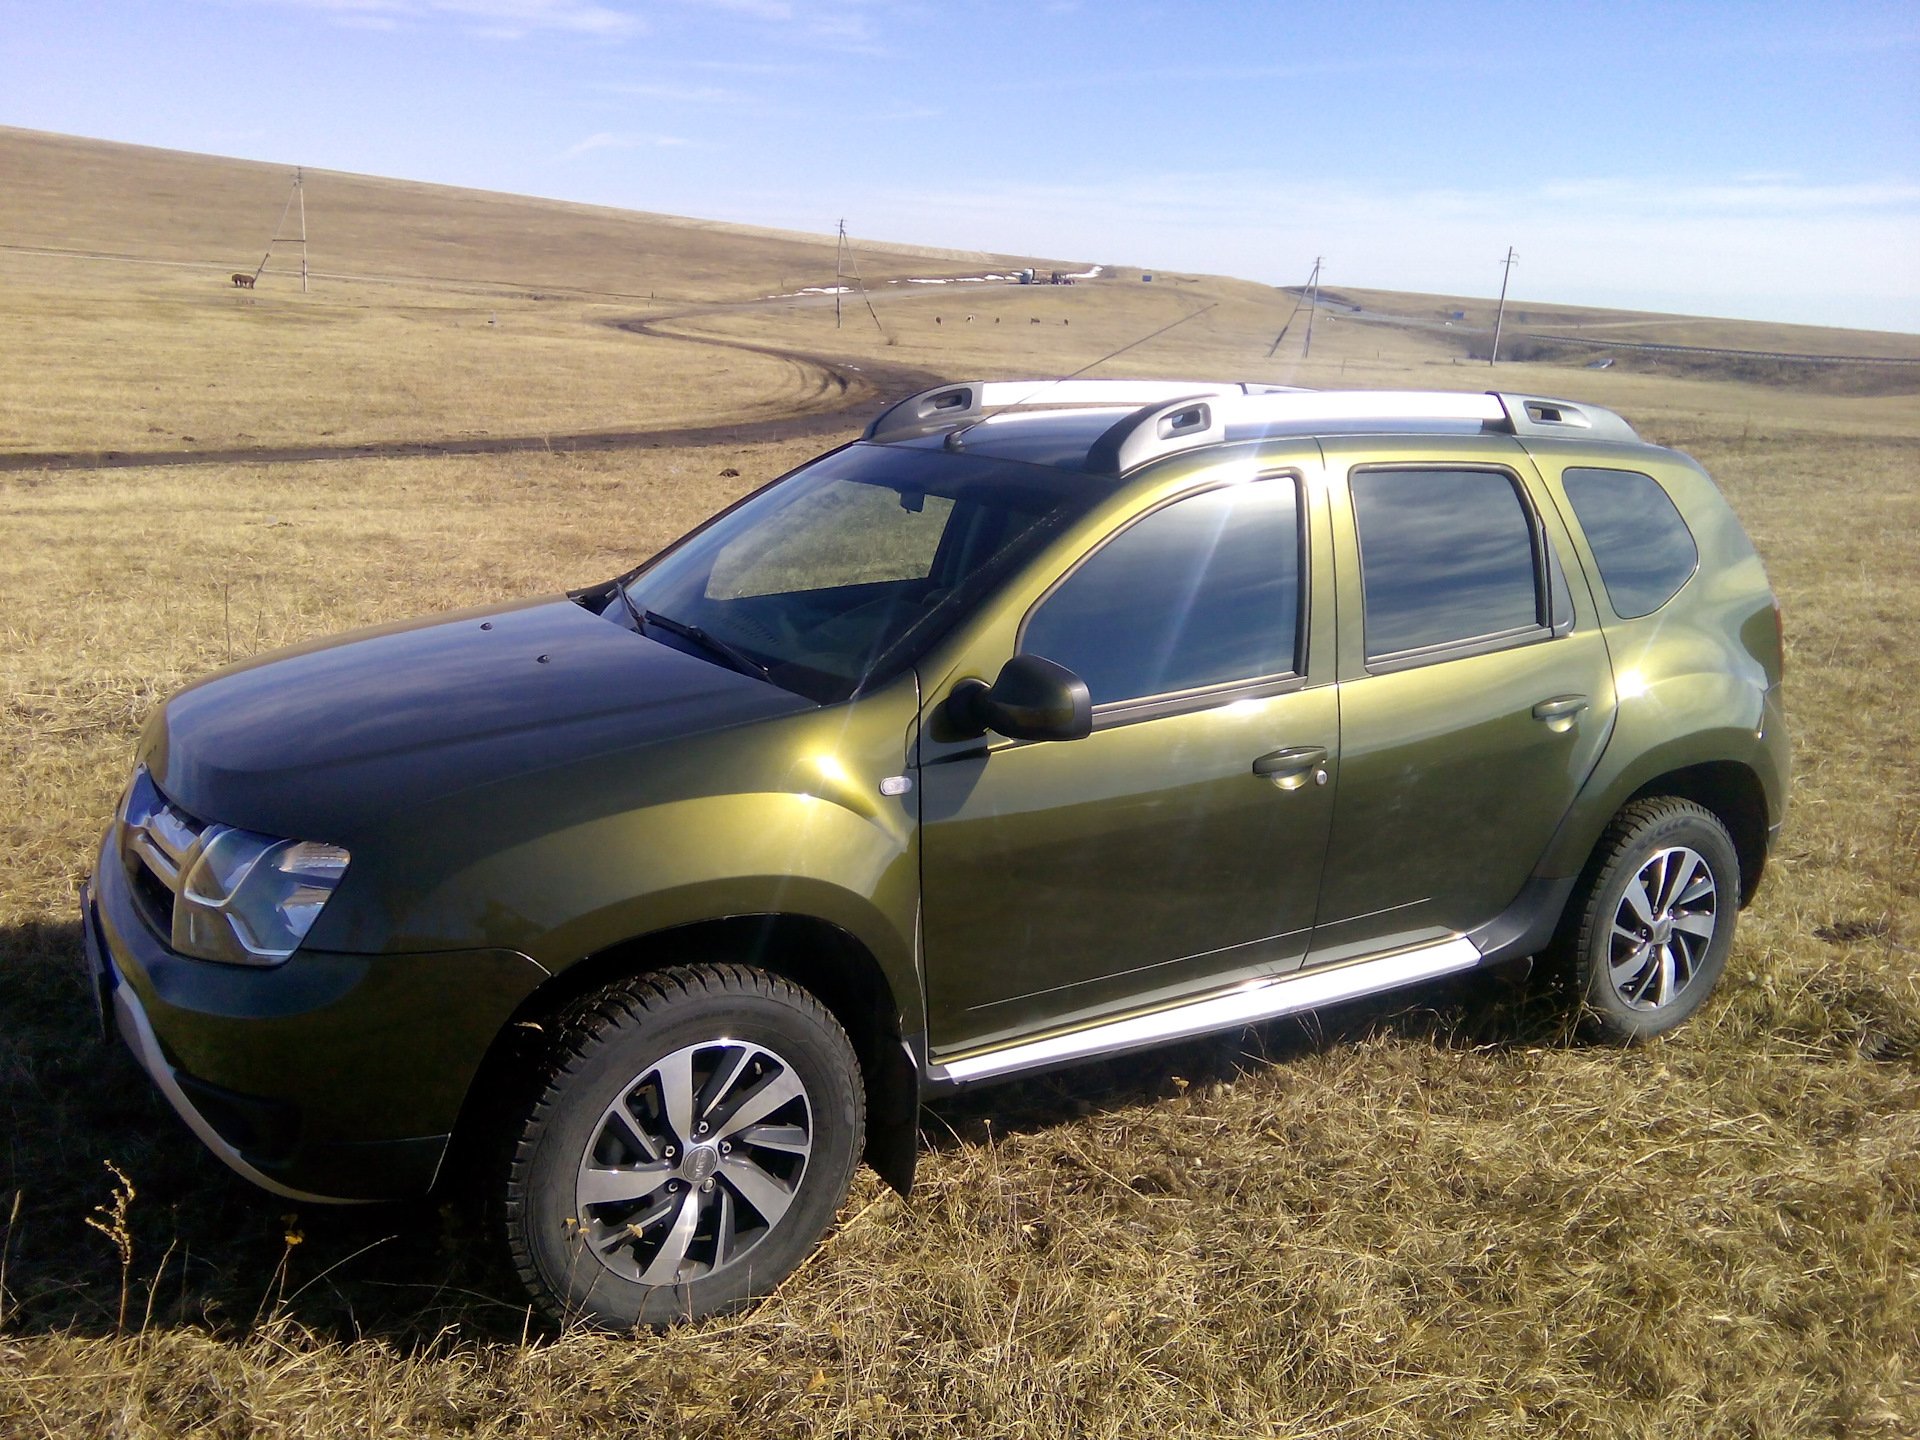 Дастер 4wd 2.0. Renault Duster 2. Рено Дастер 4х4. Renault Duster 4. Рено Дастер 2.0.